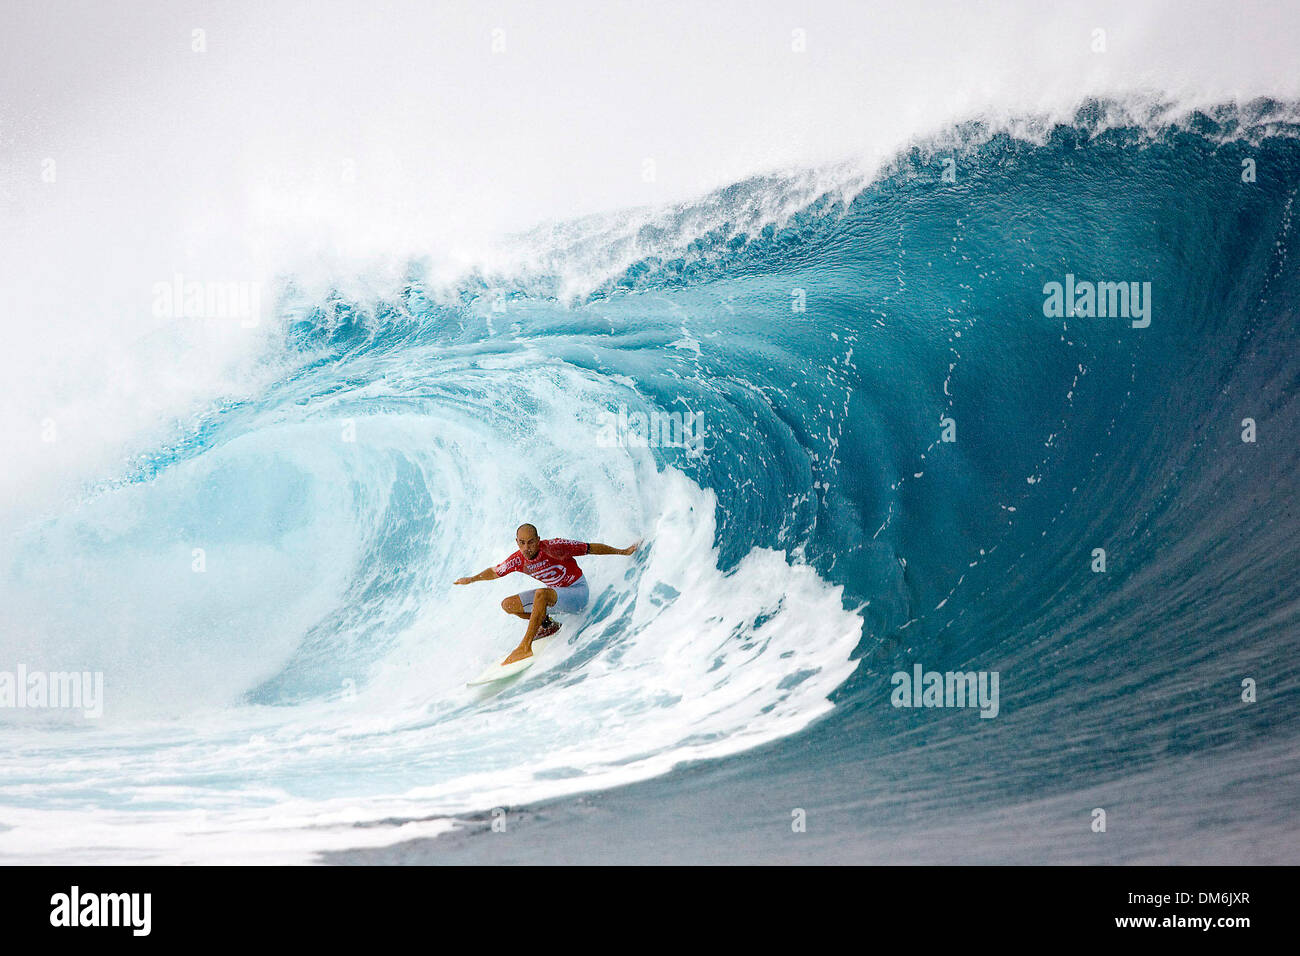 May 17, 2005; Teahupoo, Tahiti, Tahiti; Former six times ASP world champion KELLY SLATER (Cocoa Beach, Florida, USA) (pictured) made surfing history, scoring perfect points (20 out of 20) to clinch the Billabong Pro Tahiti title before the 30 minute final was completed. Slater was unstoppable throughout the event, posting near perfect heat scores in most of the rounds, making this  Stock Photo